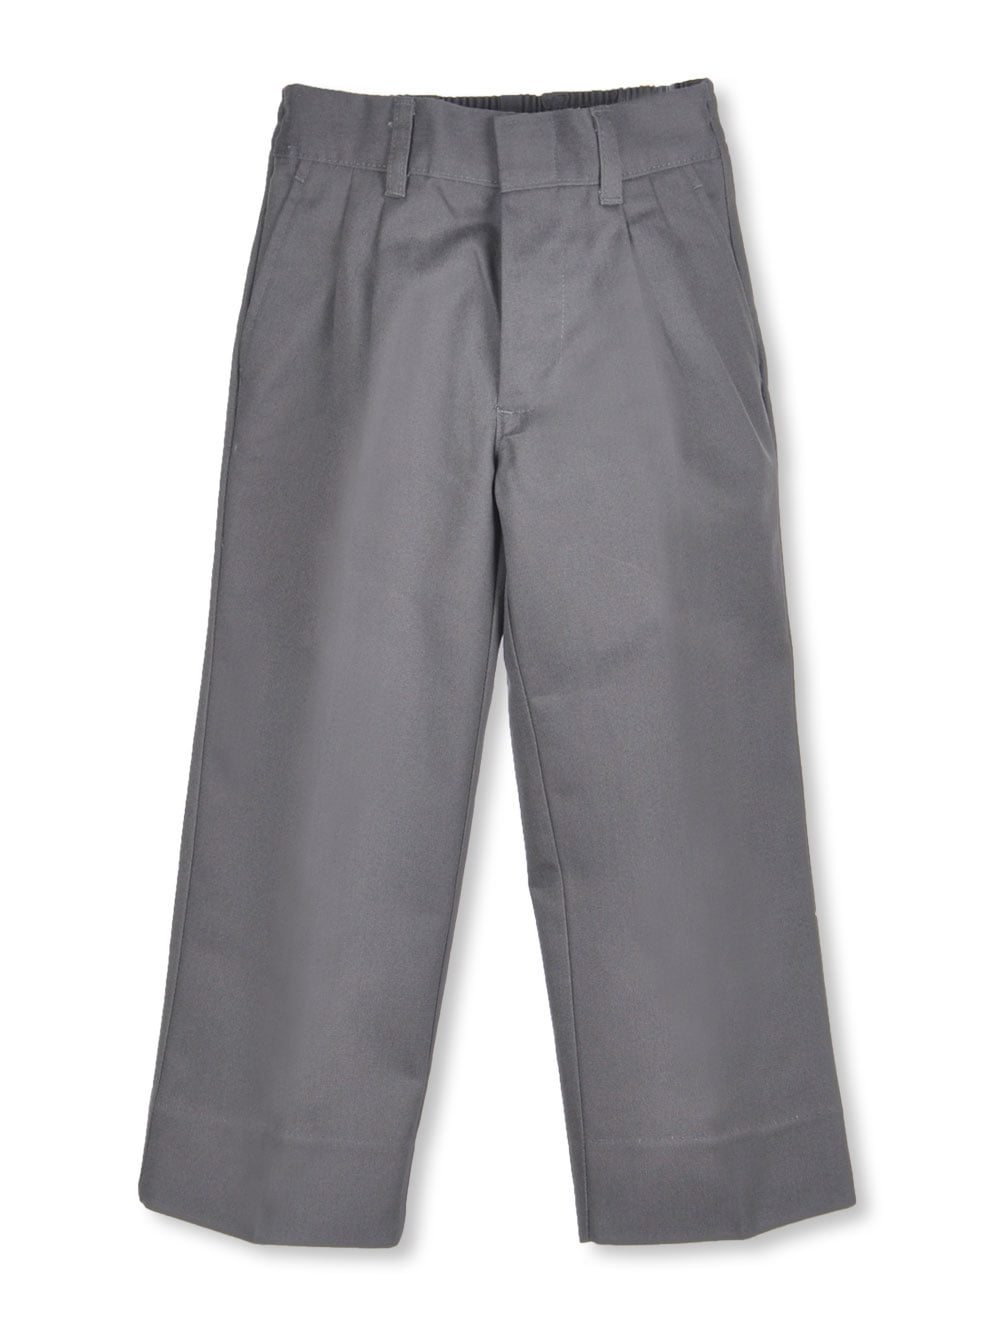 Cookie's Little Boys' Pleated Pants (Sizes 4 - 7) - gray, 5 (Little ...